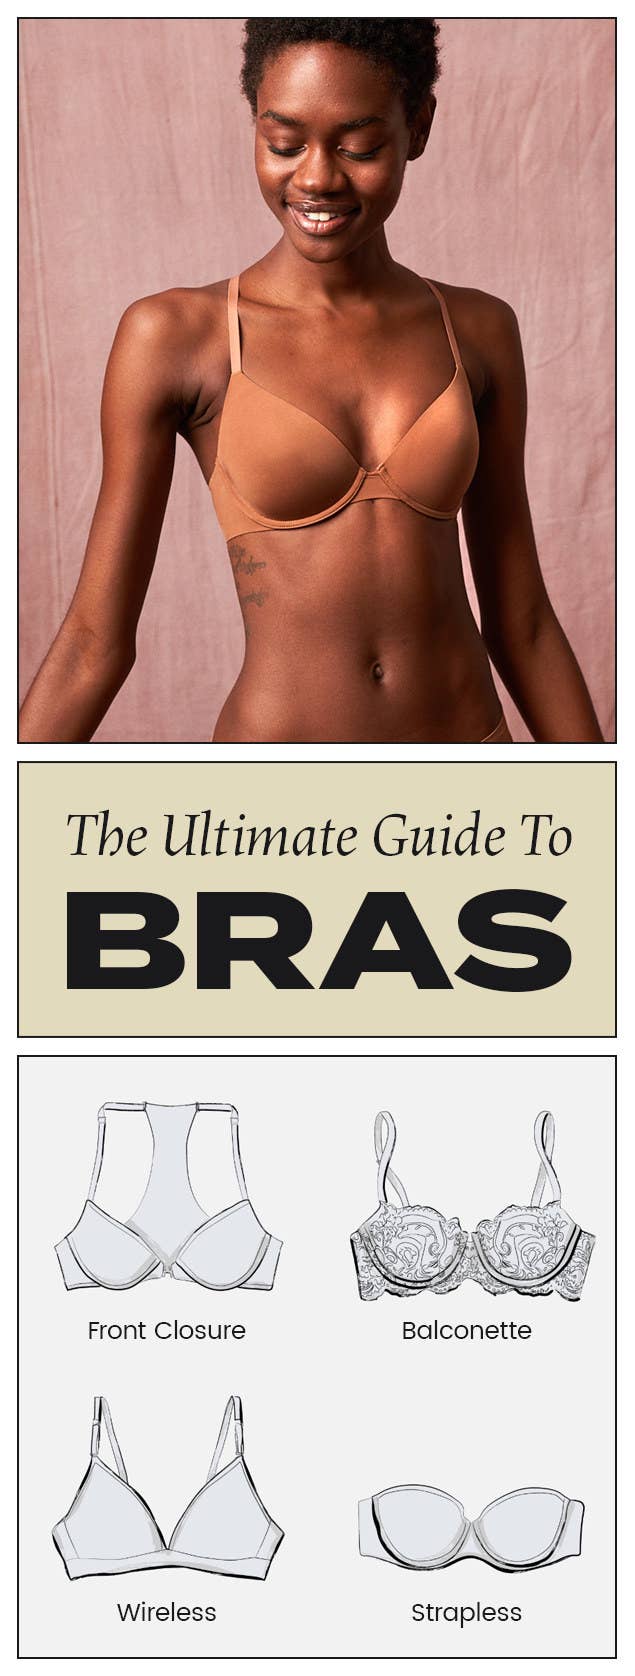 C Cup Breasts and Bra Size [Ultimate Guide]